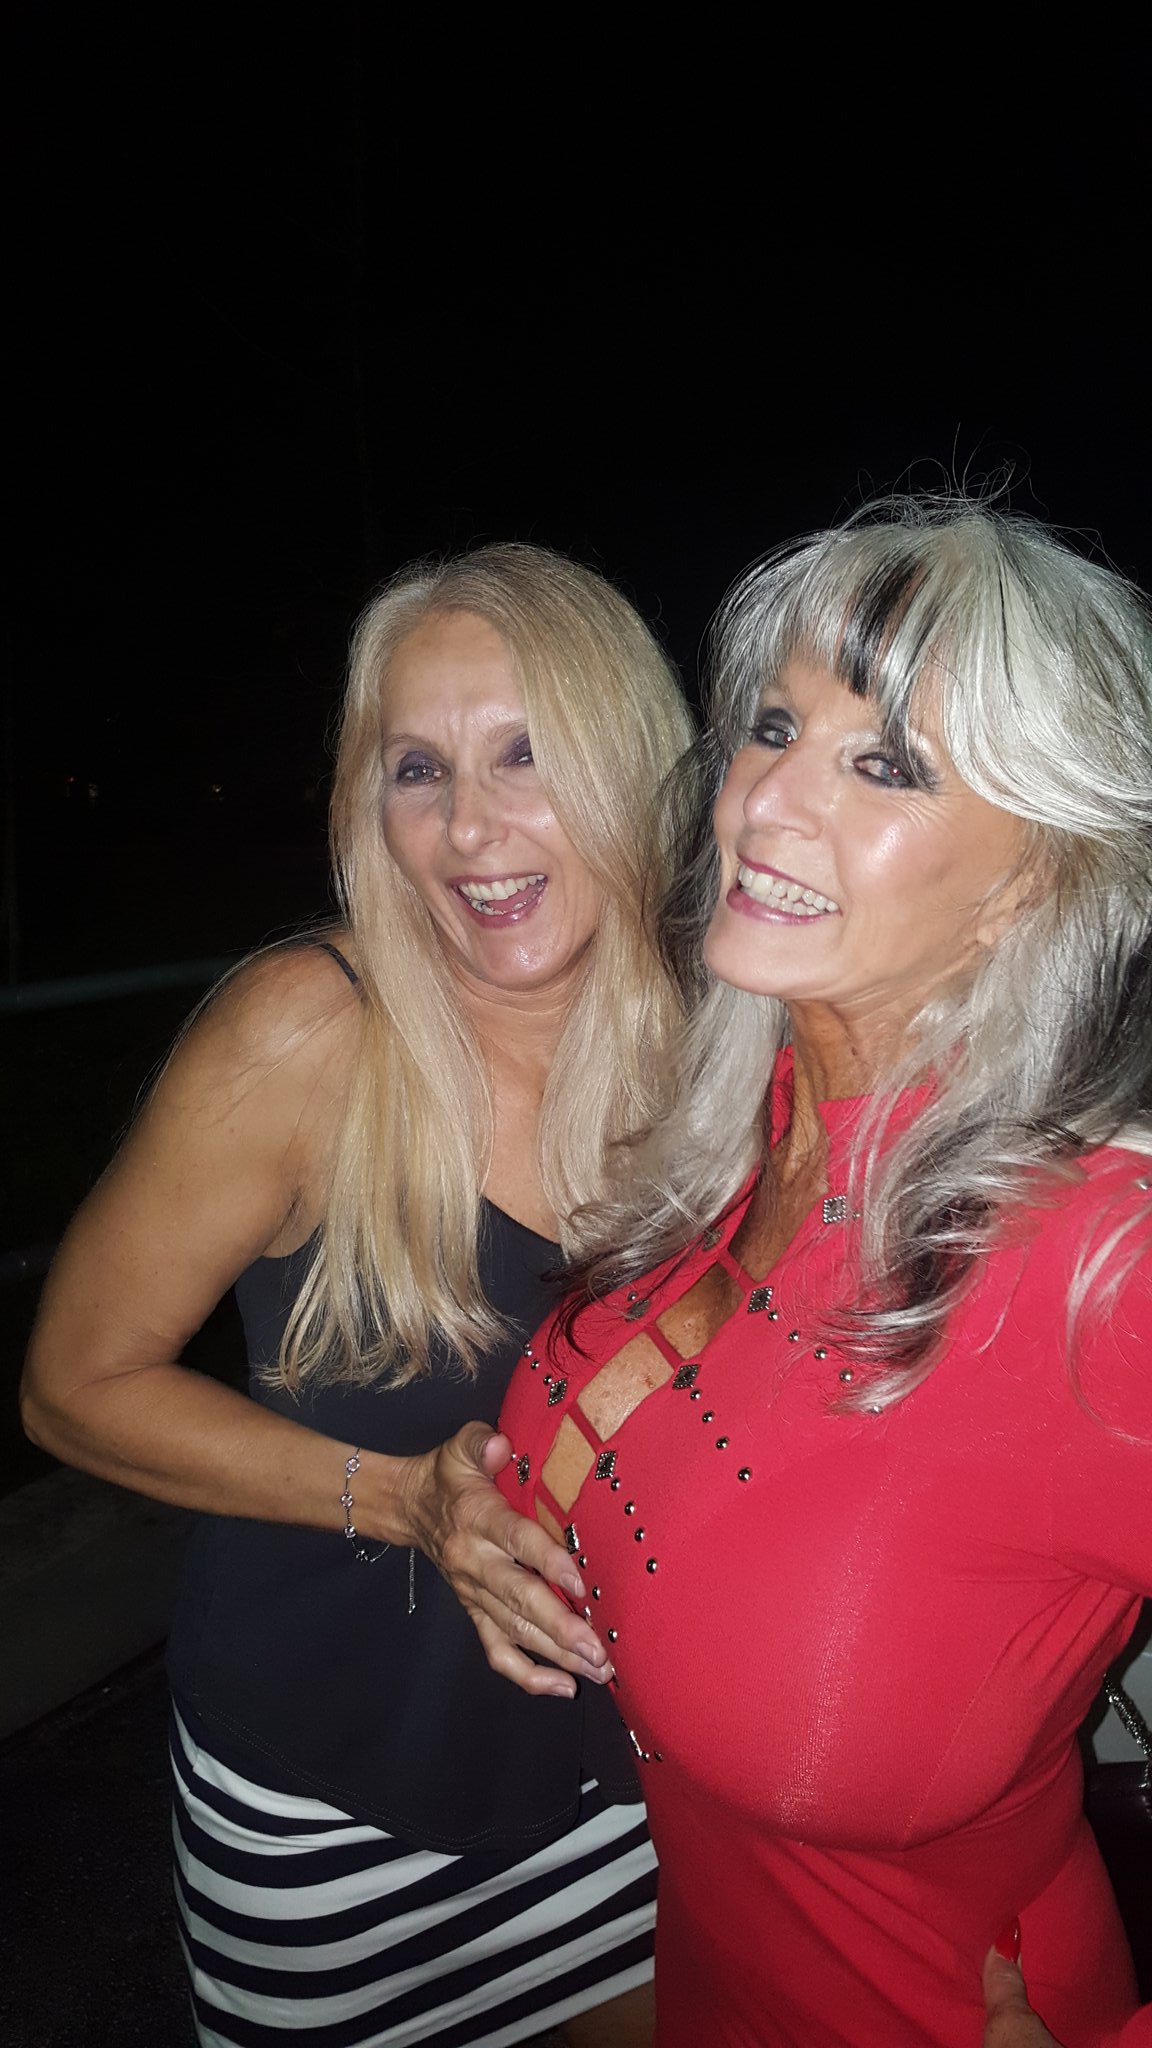 Sally D'Angelo on X: Cebrating my birthday with my girlfriend Chery Leigh  t.coLio7dp9mSt  X